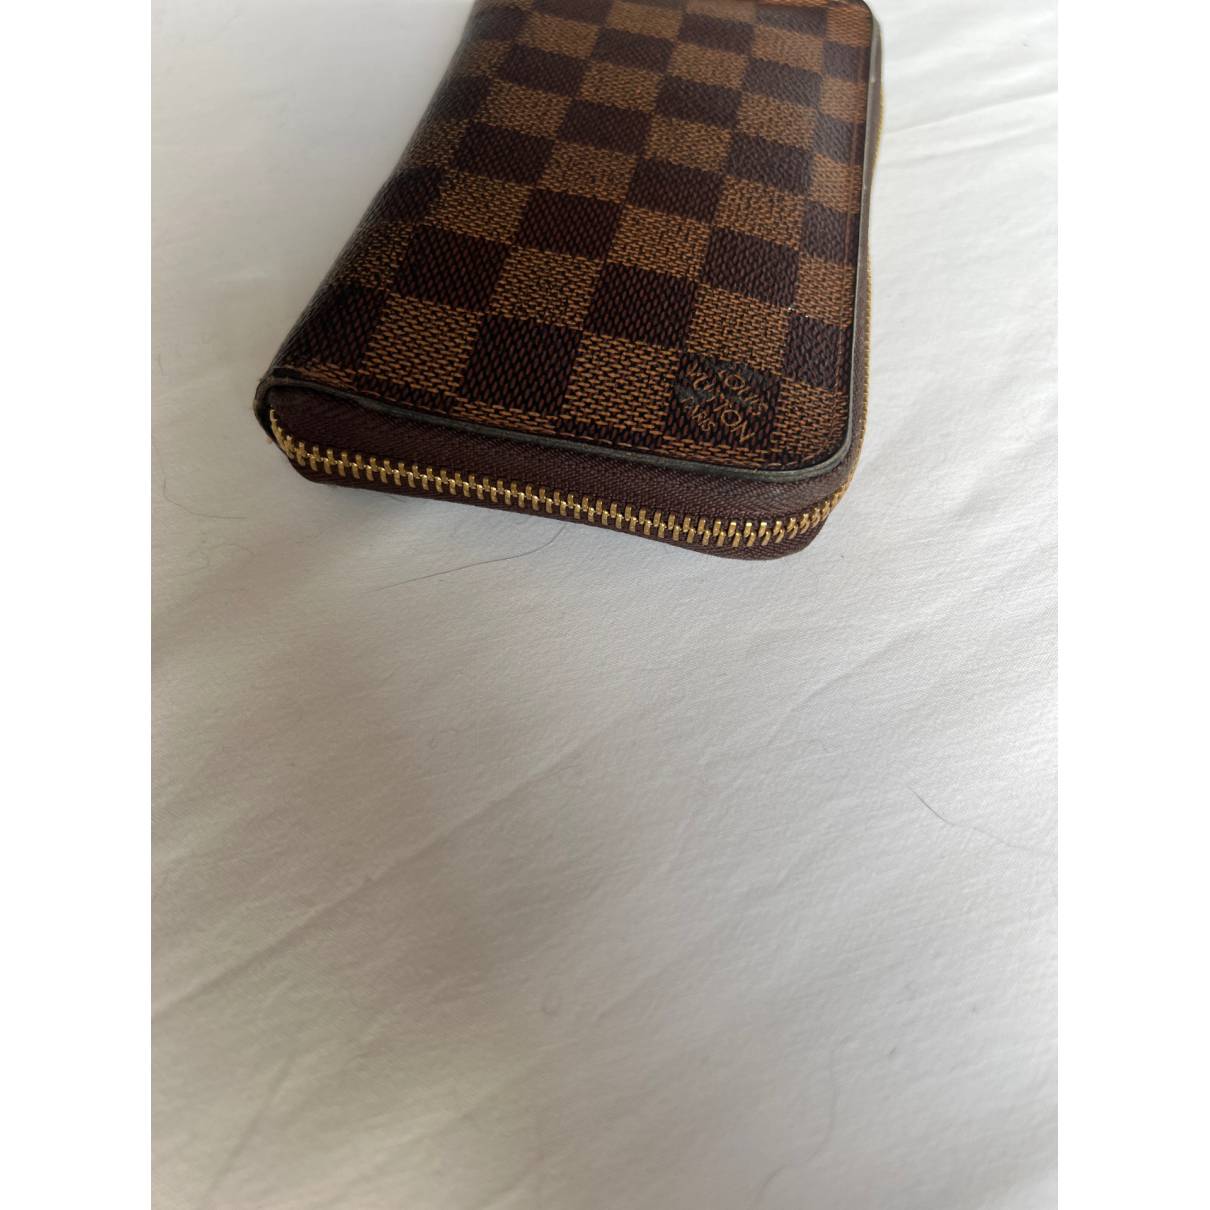 Louis Vuitton - Authenticated Zippy Wallet - Cloth Brown for Women, Very Good Condition